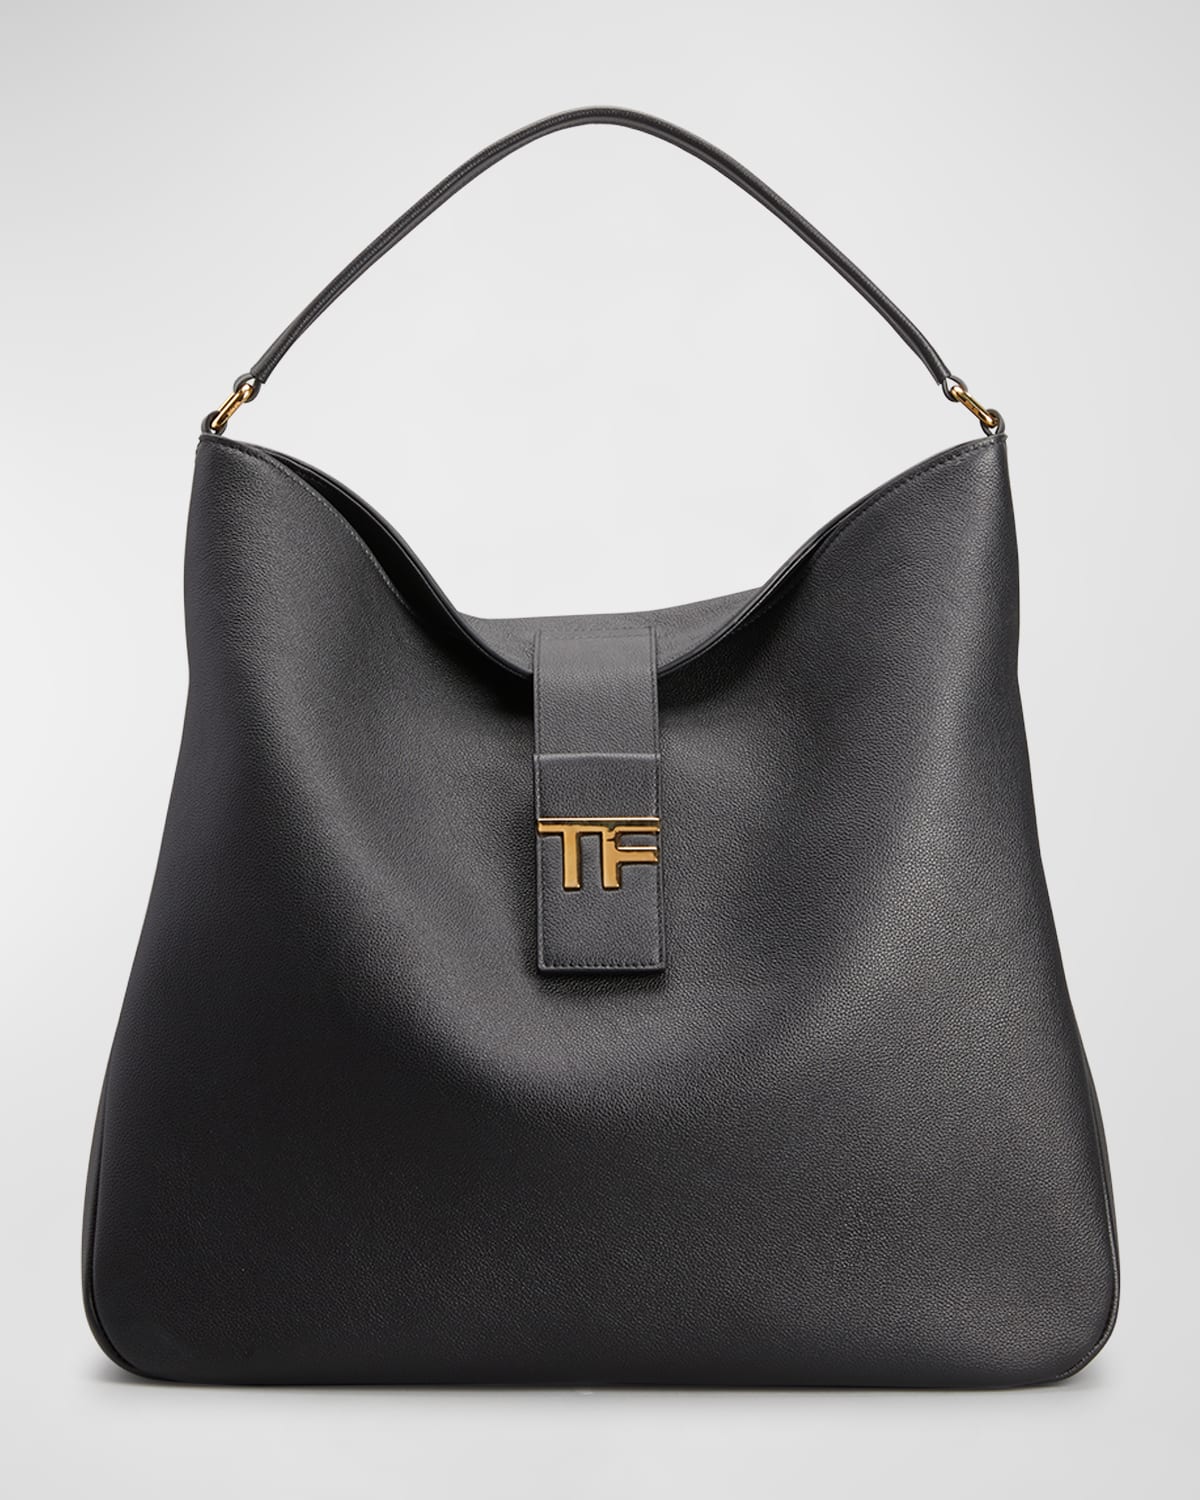 TF Medium Hobo in Grained Leather